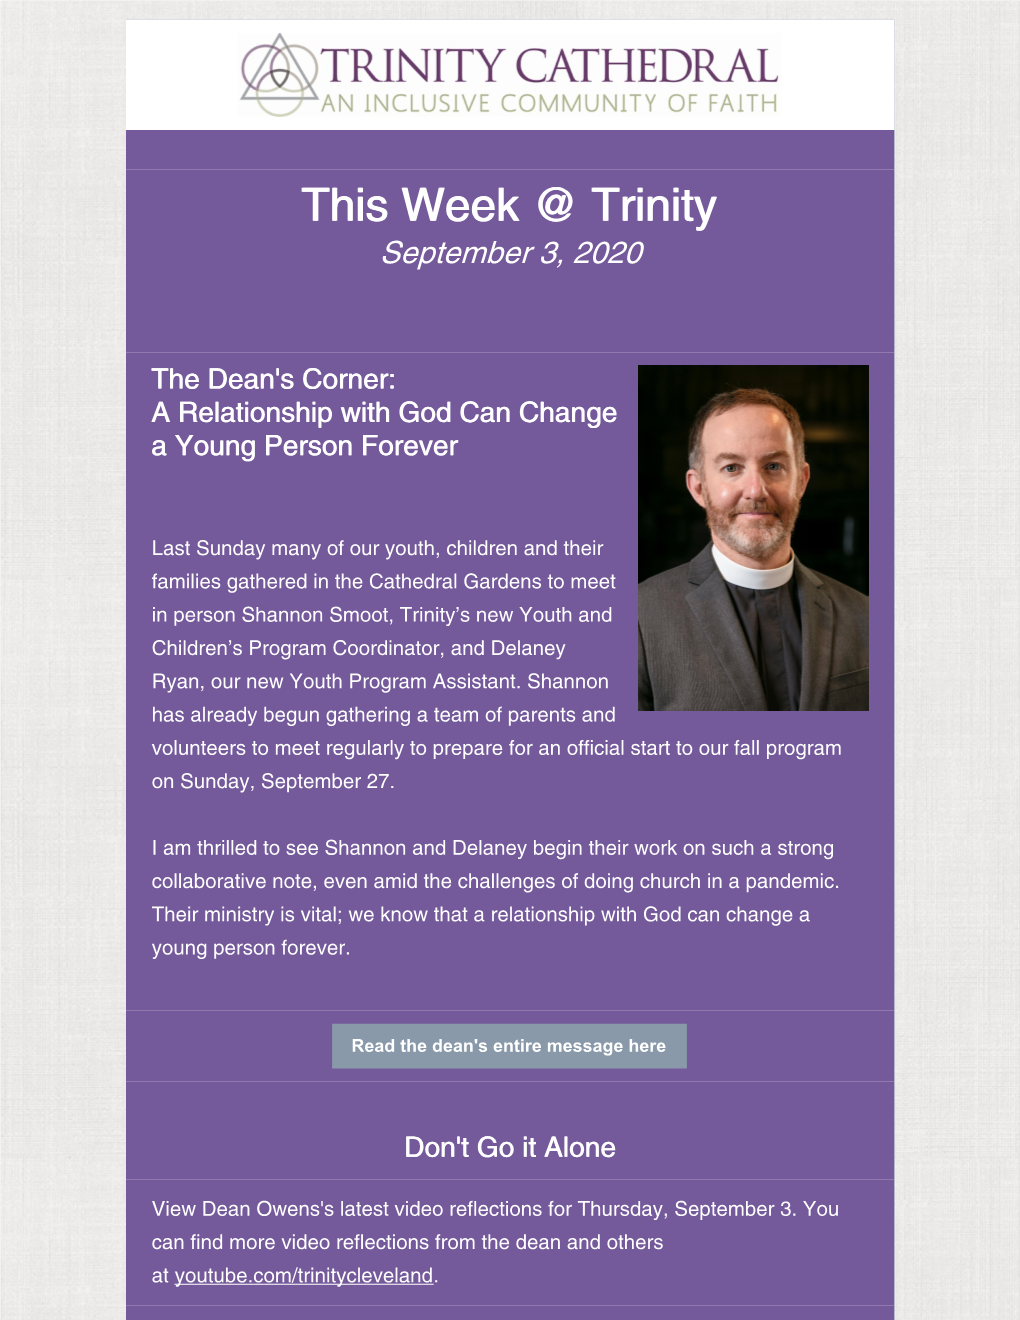 This Week @ Trinity | Fourteenth Sunday After Pentecost